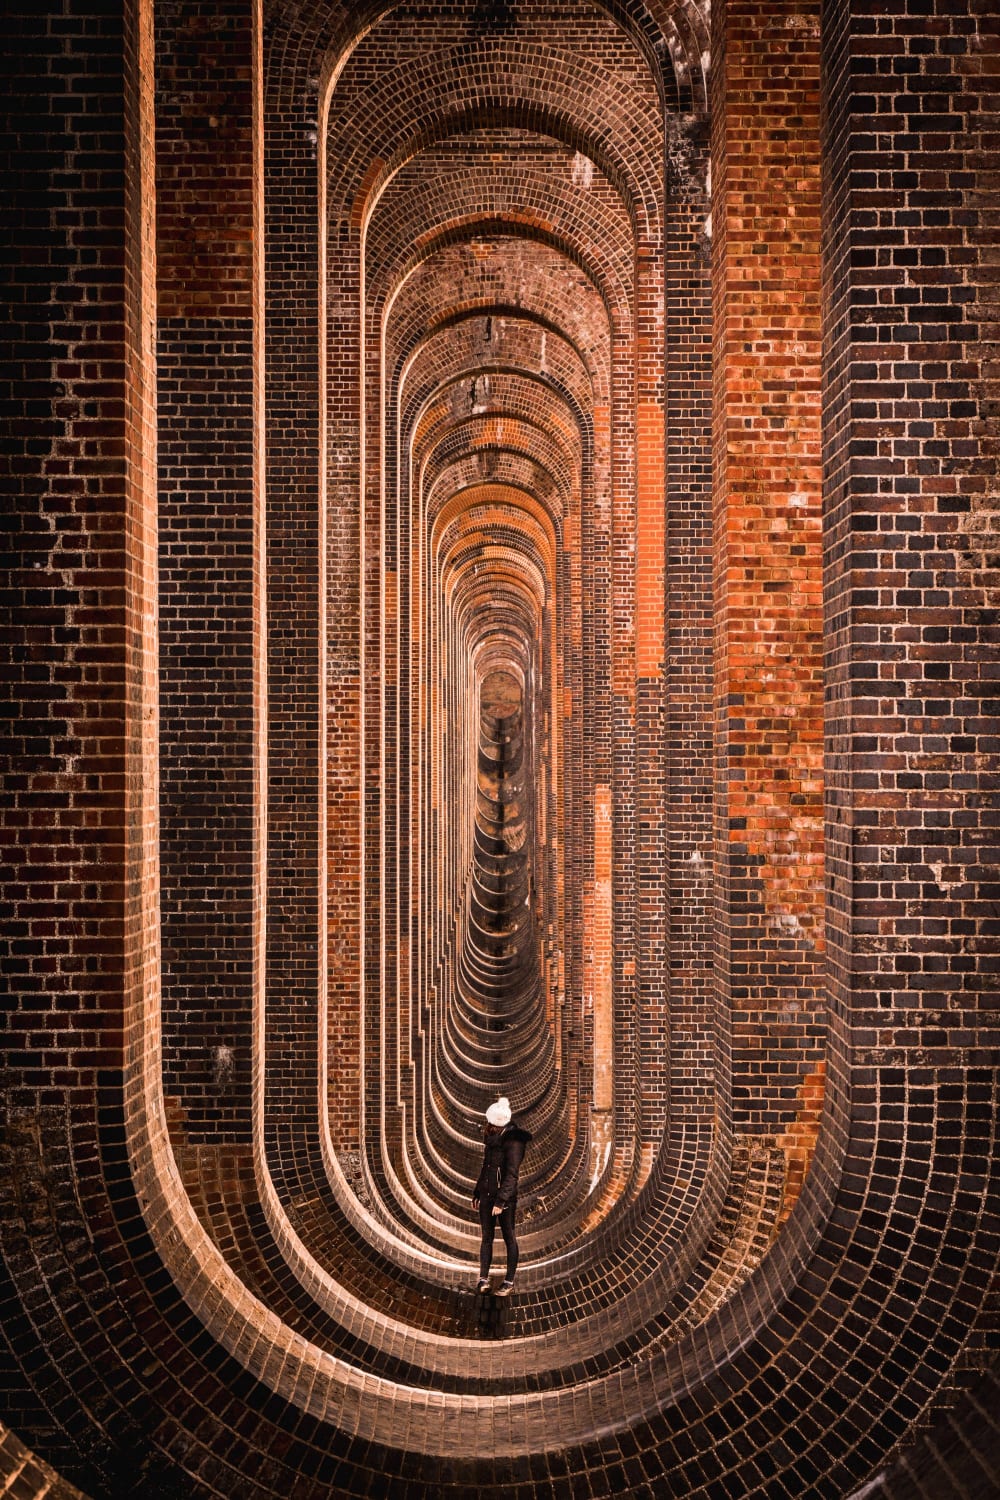 This awesome viaduct in South England